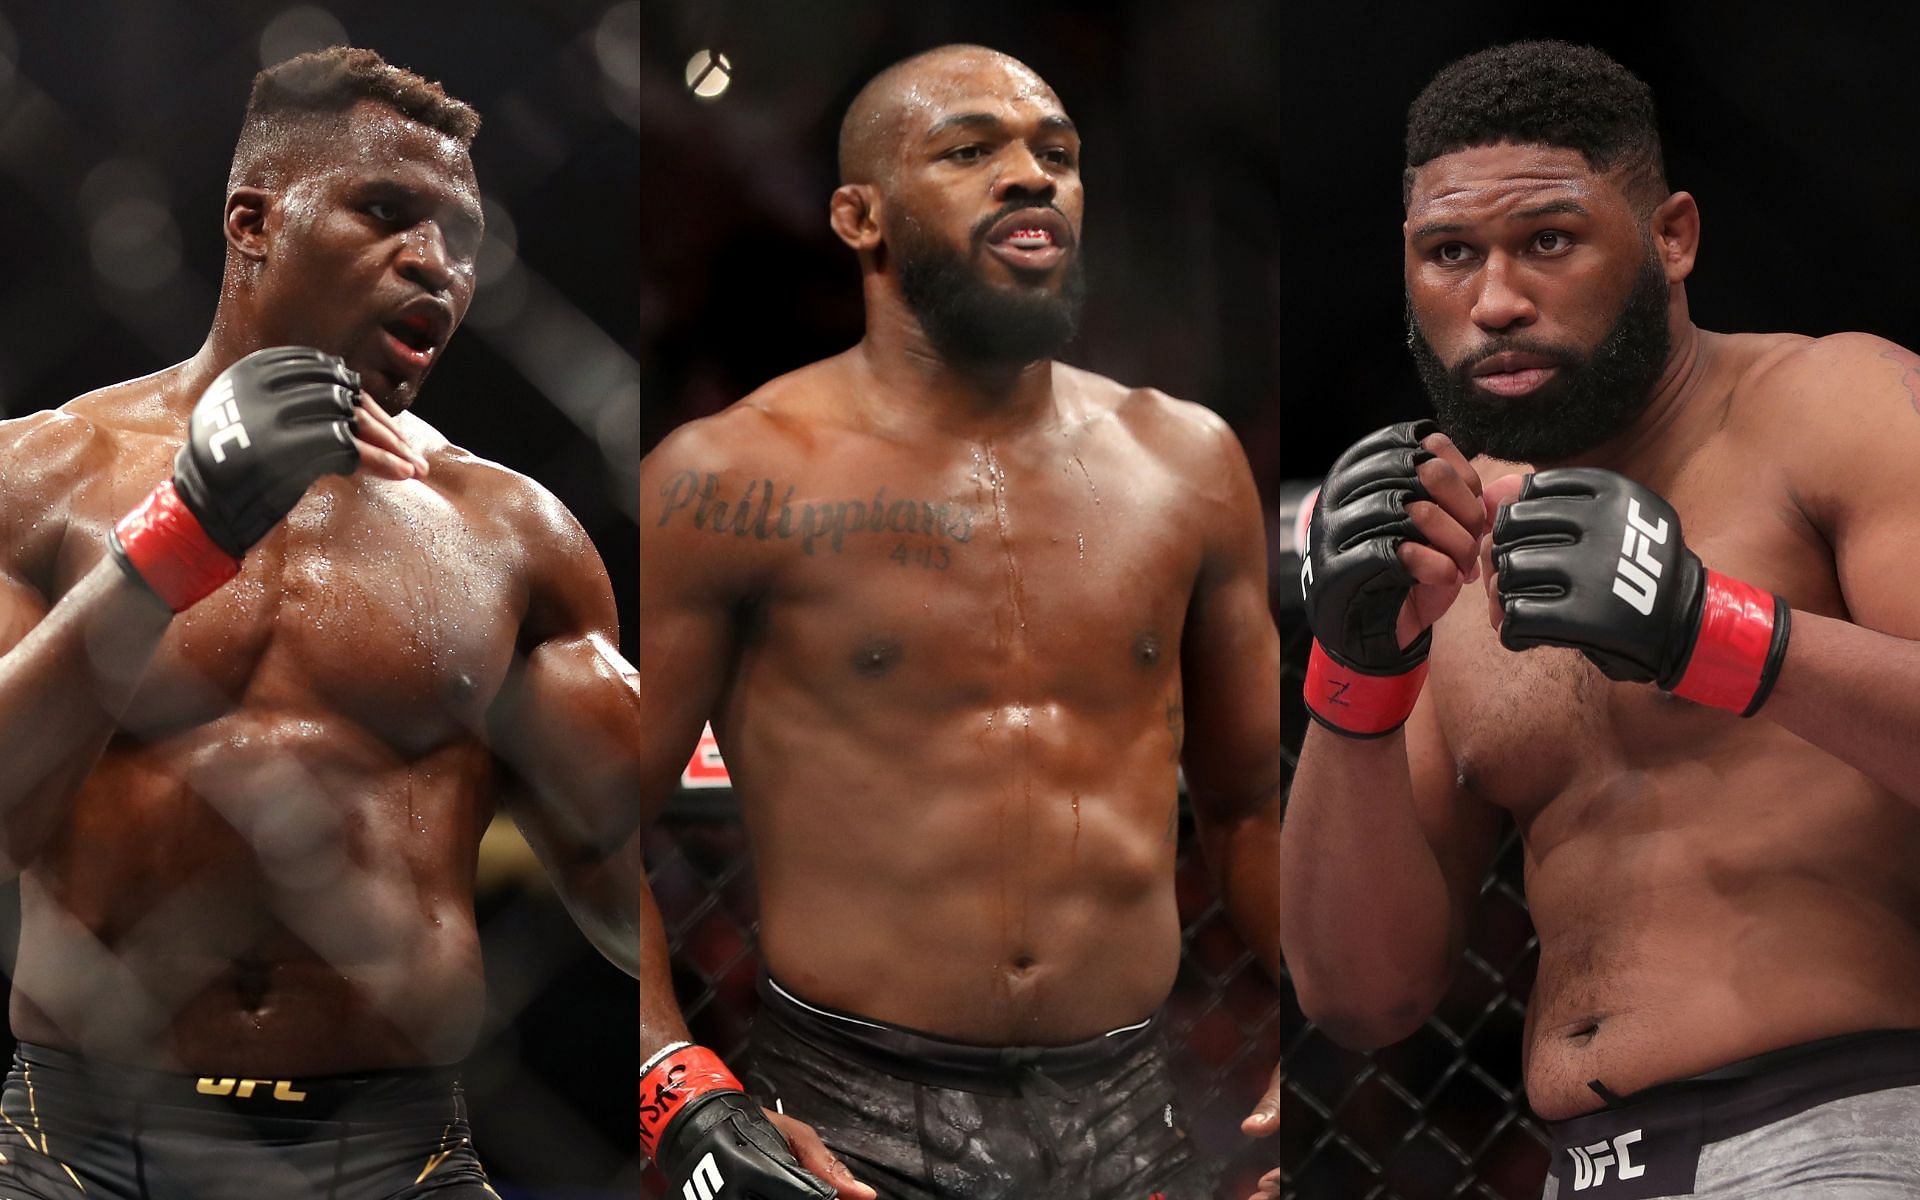 From left to right: Francis Ngannou, Jon Jones, and Curtis Blaydes